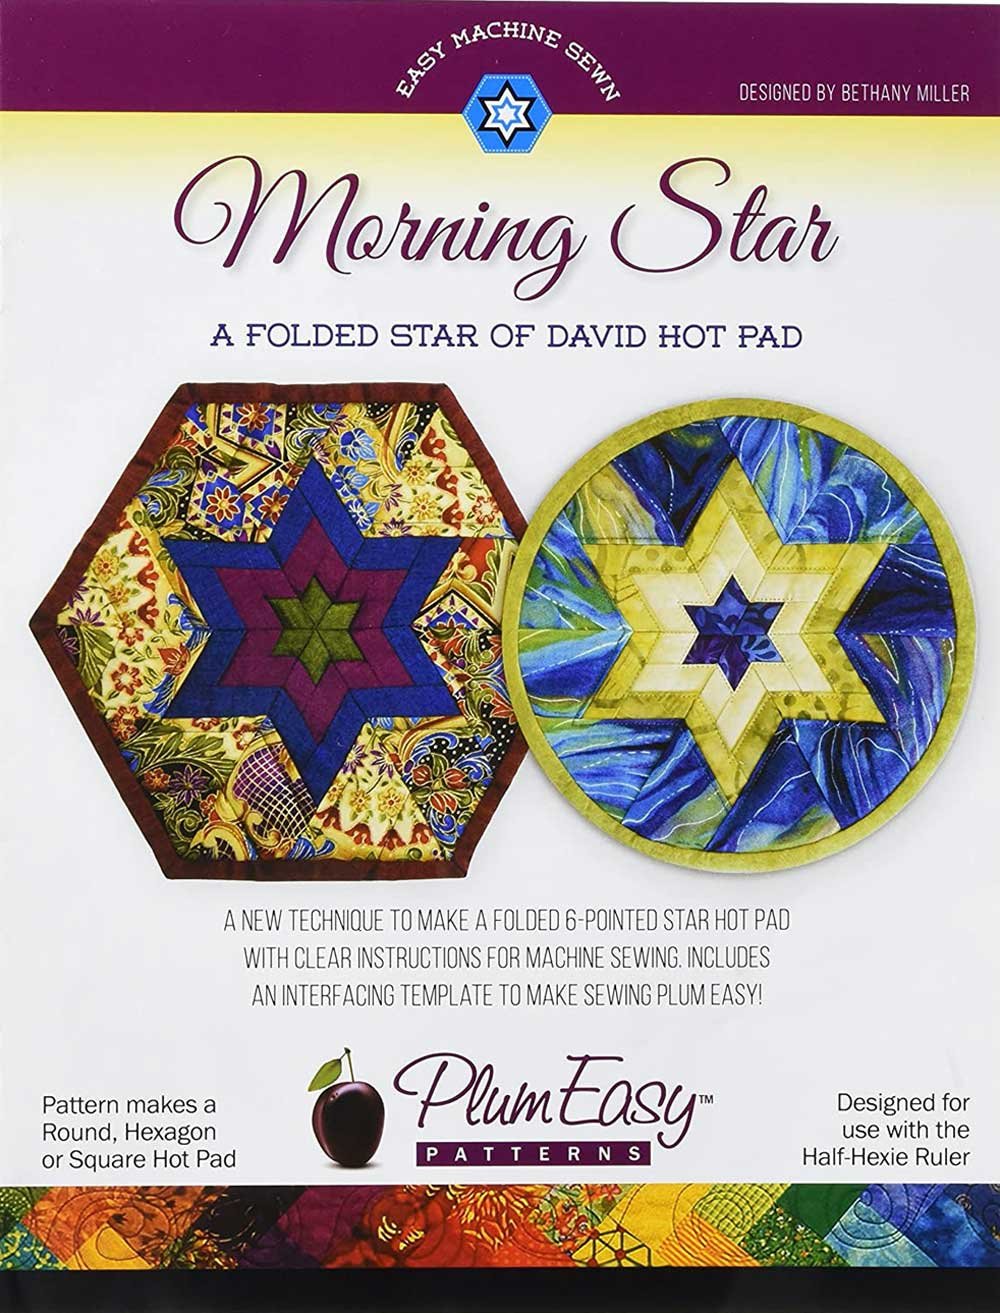 The Morning Star hot pad is fun and easy to make, and can be made in a variety of shapes.